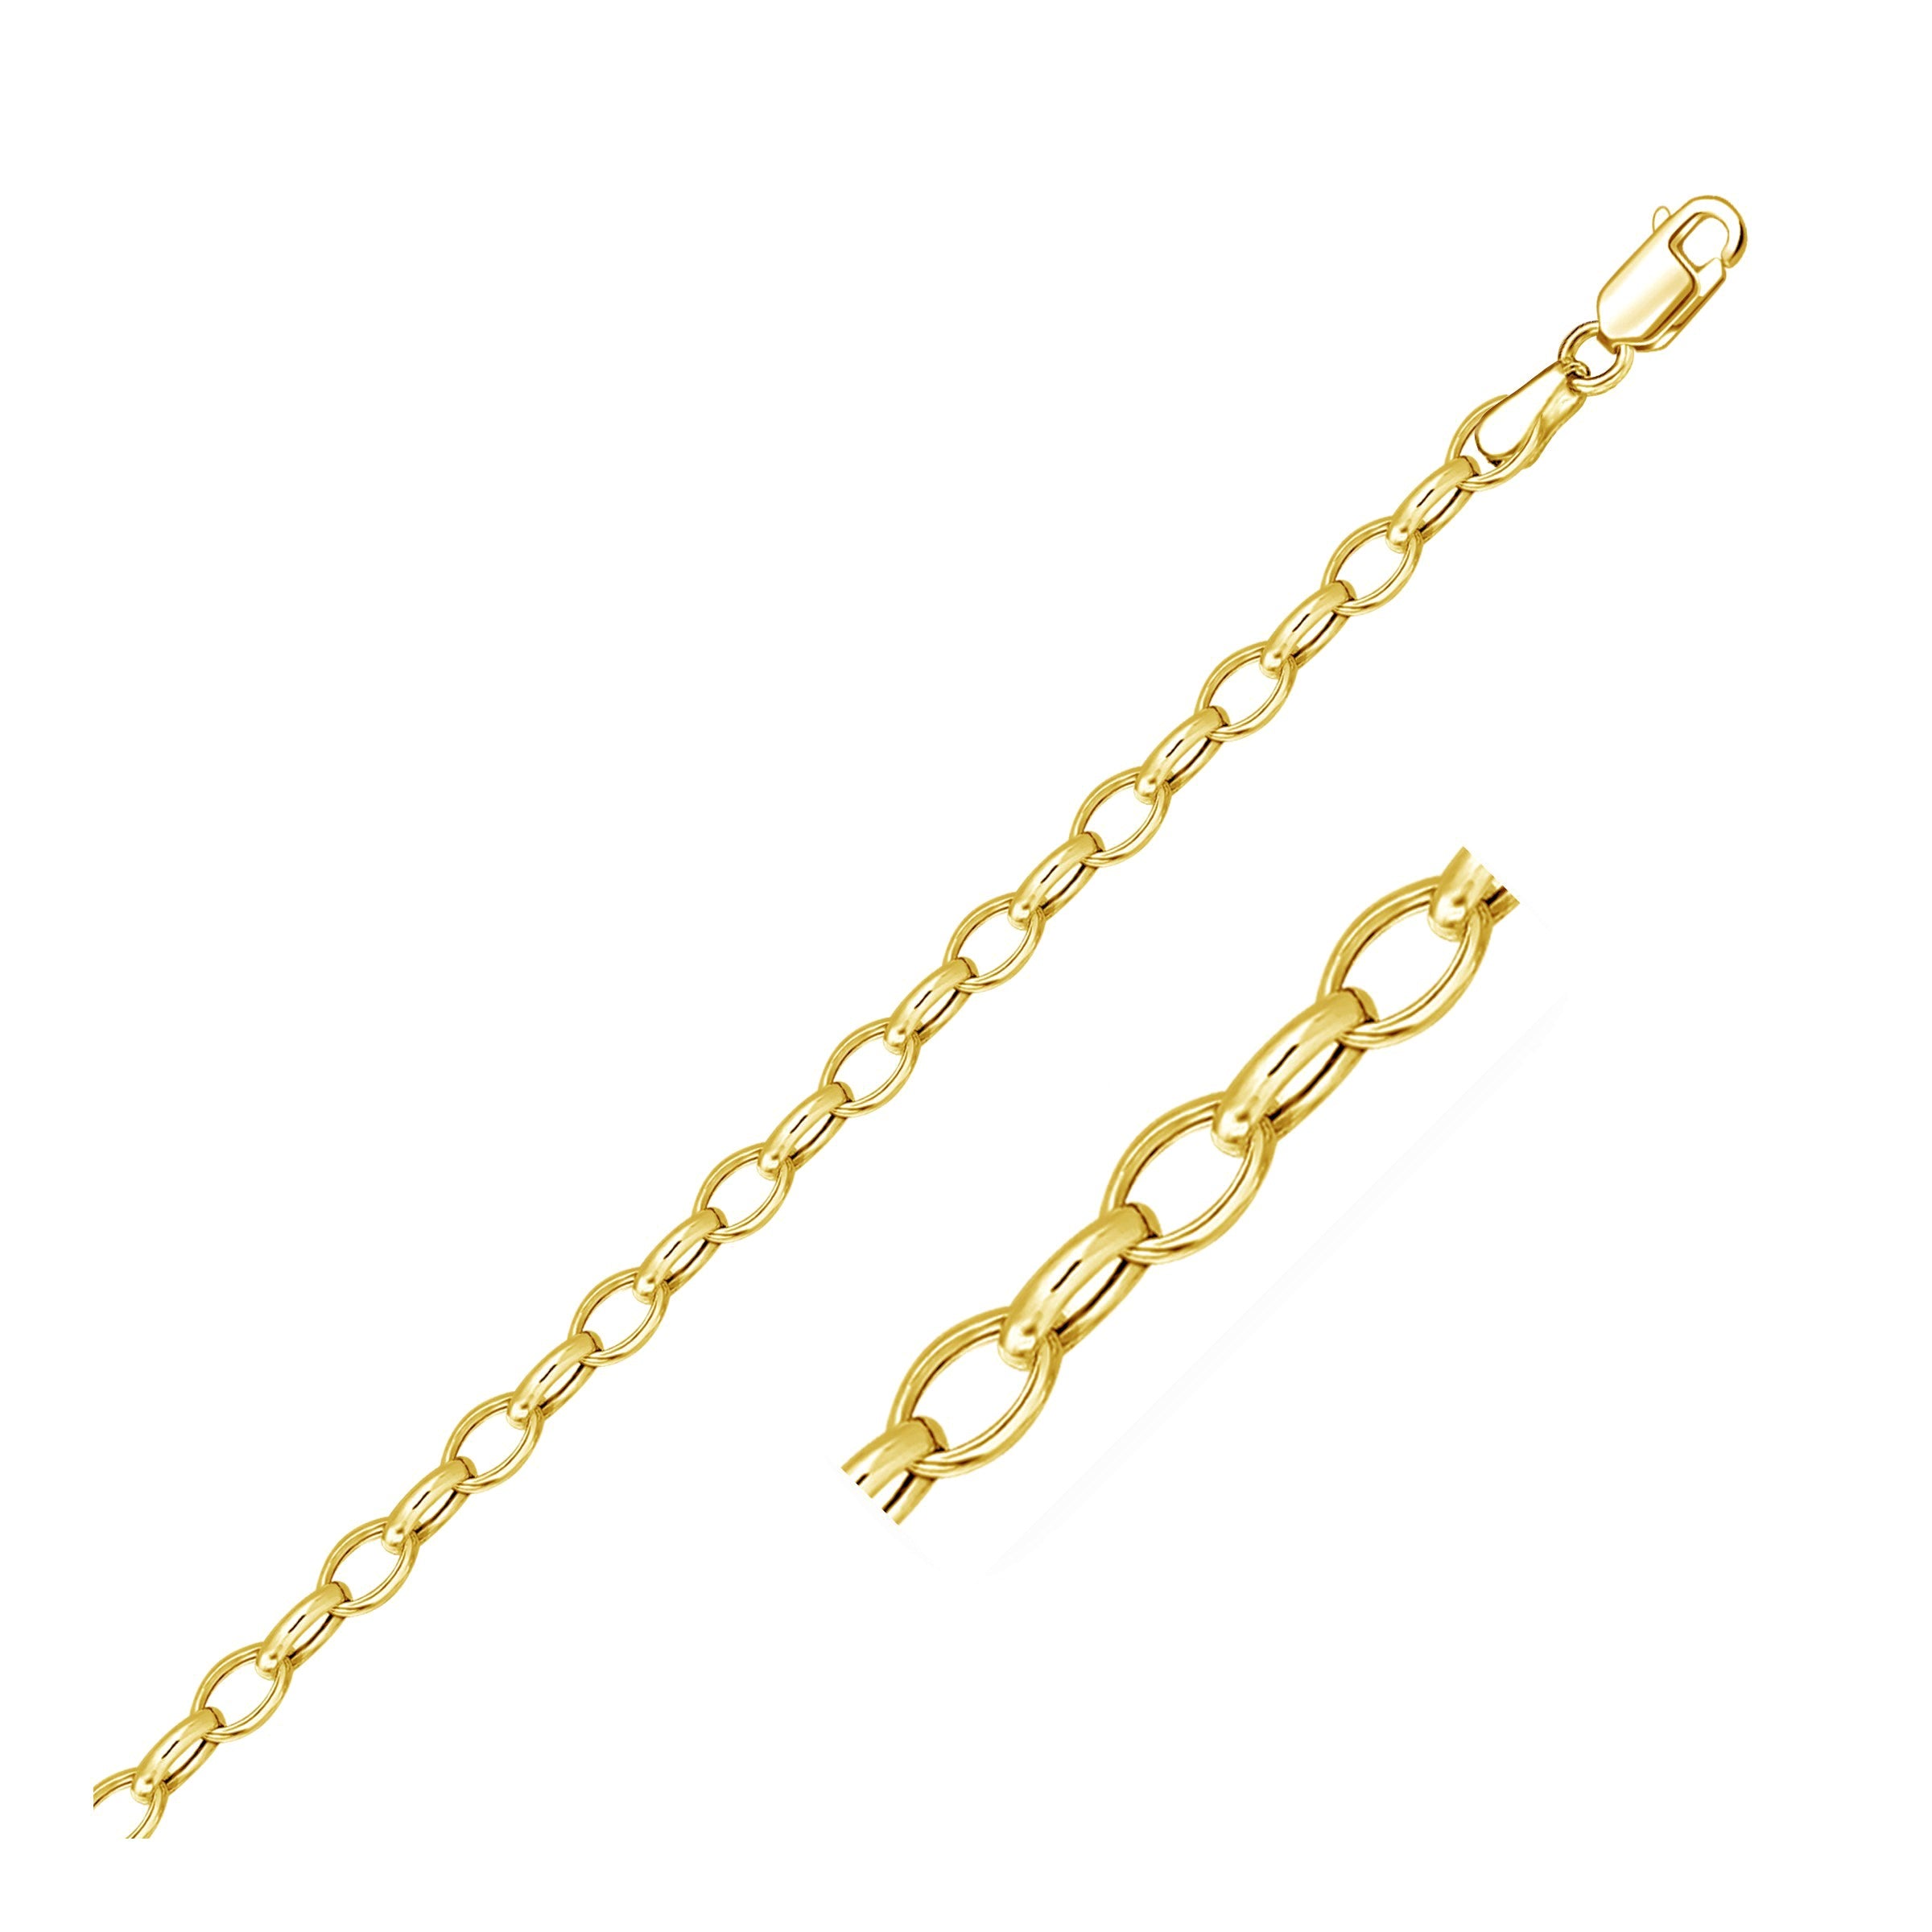 4 6Mm 14K Yellow Gold Oval Rolo Chain 3317-1